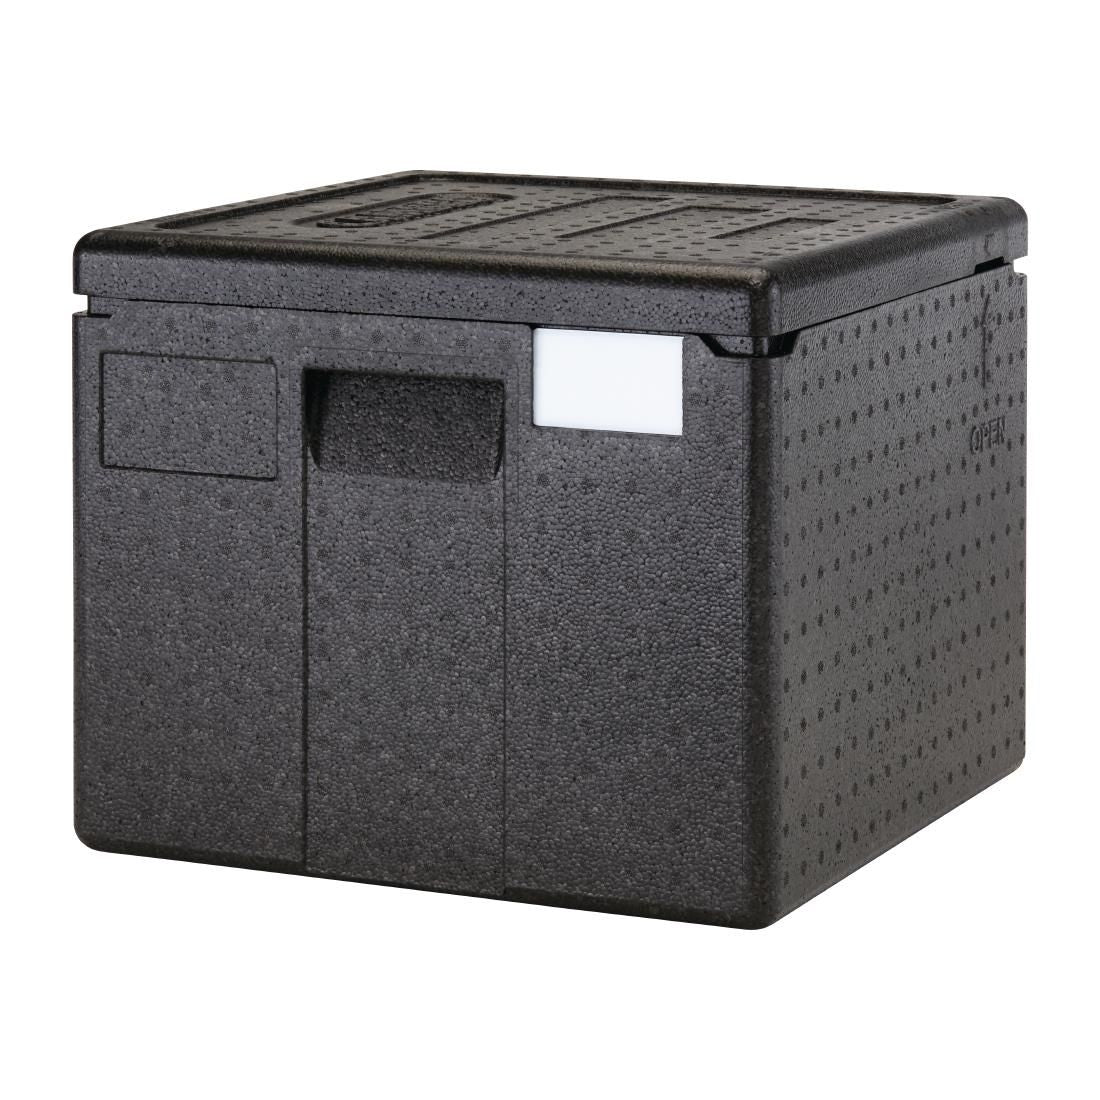 CW810 Cambro Toploading Pizza Transport Box 265mm JD Catering Equipment Solutions Ltd